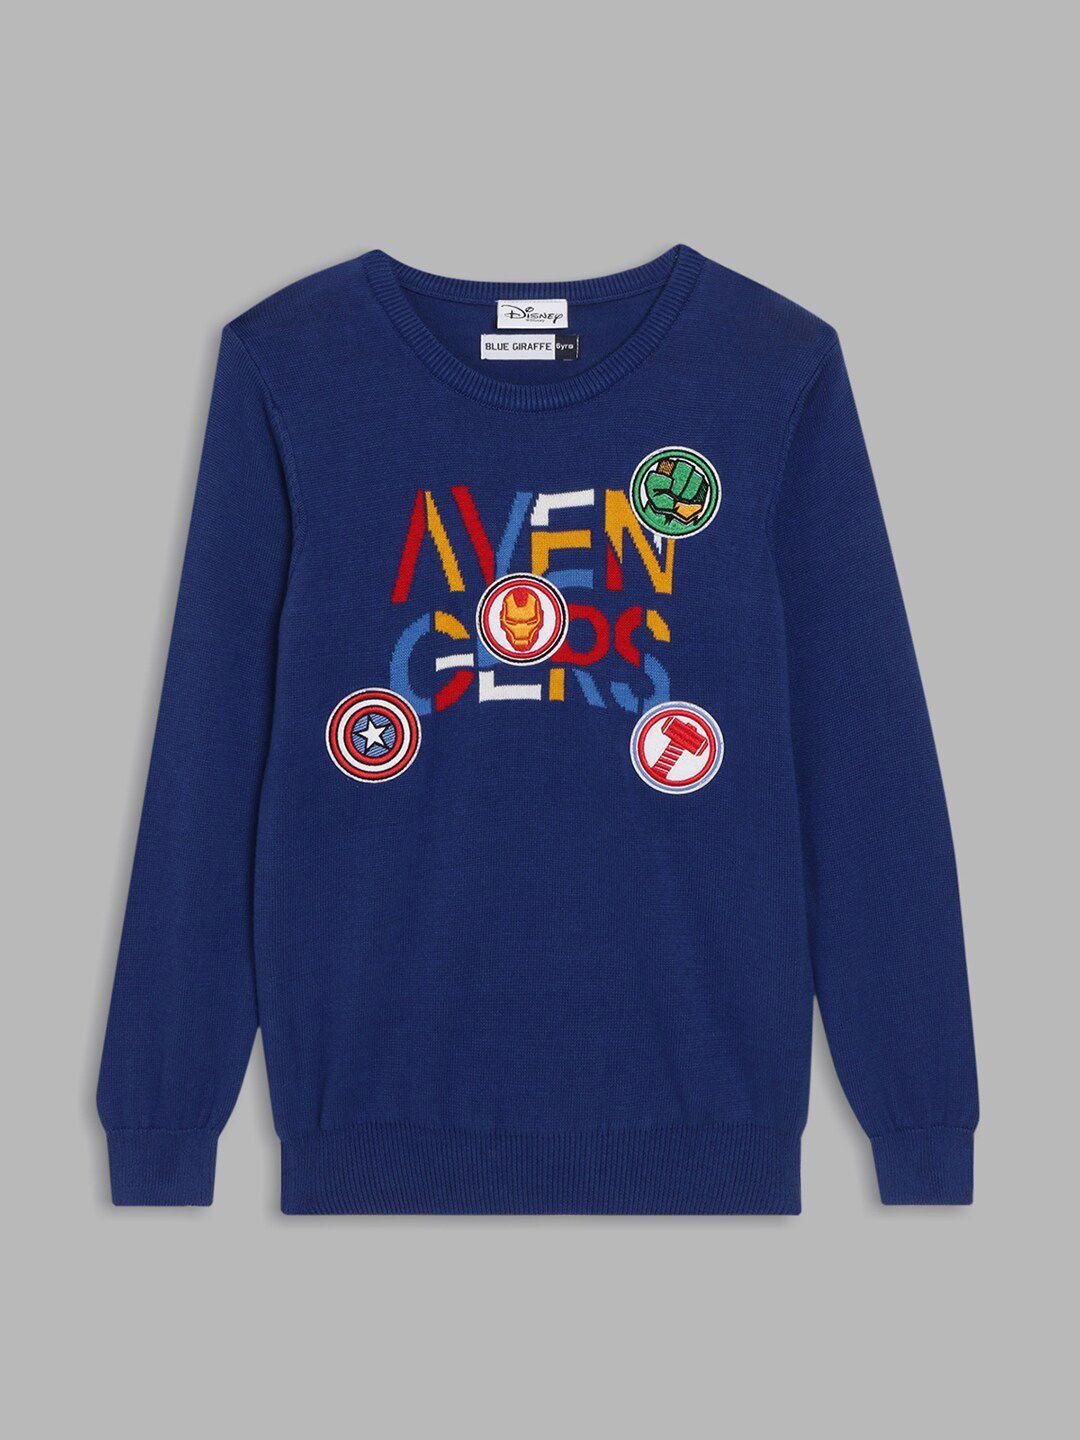 Blue Giraffe Boys Navy Blue & Yellow Avengers Typography Printed Cotton Pullover Sweater